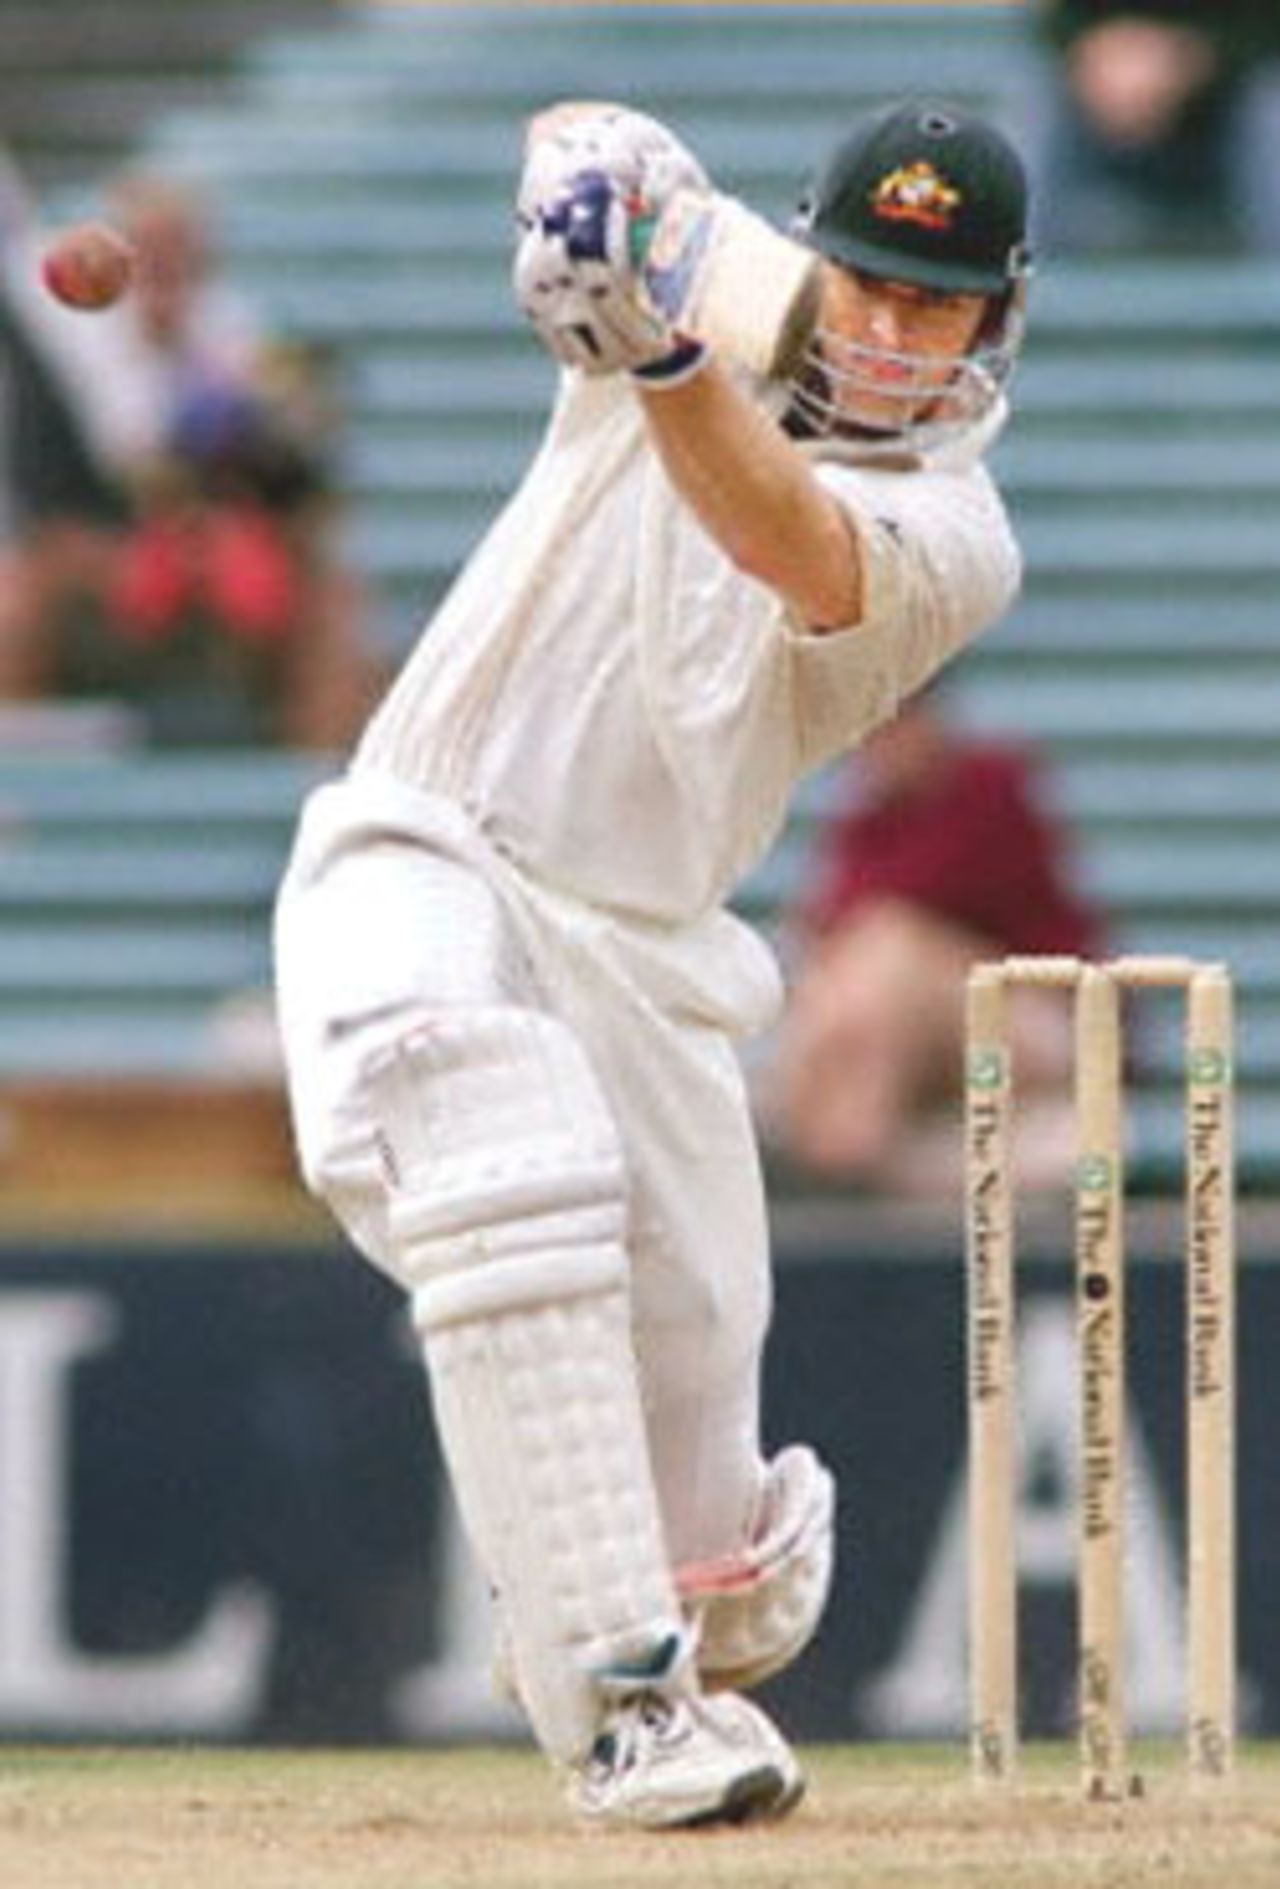 Australian batsman Adam Gilchrist lofts a ball to the boundary from New Zealand bowler Paul Wiseman on the third day of the first Test match played at Eden Park in Auckland 13 March 2000. Gilchrist was 51 not out and Australia in their second innings were 206-7 for a lead of 257 run at lunch.